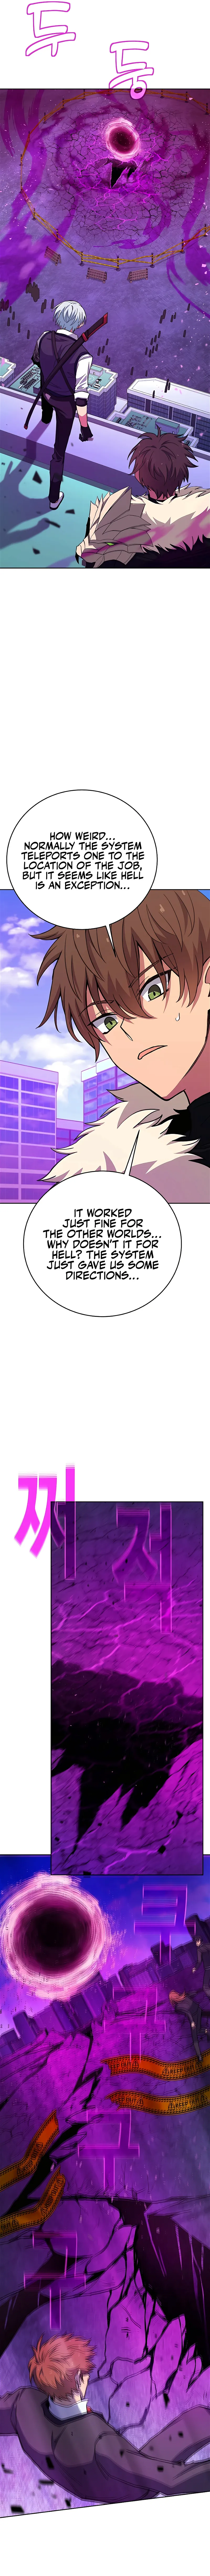 I Became A Part Time Employee For Gods Chapter 54 page 7